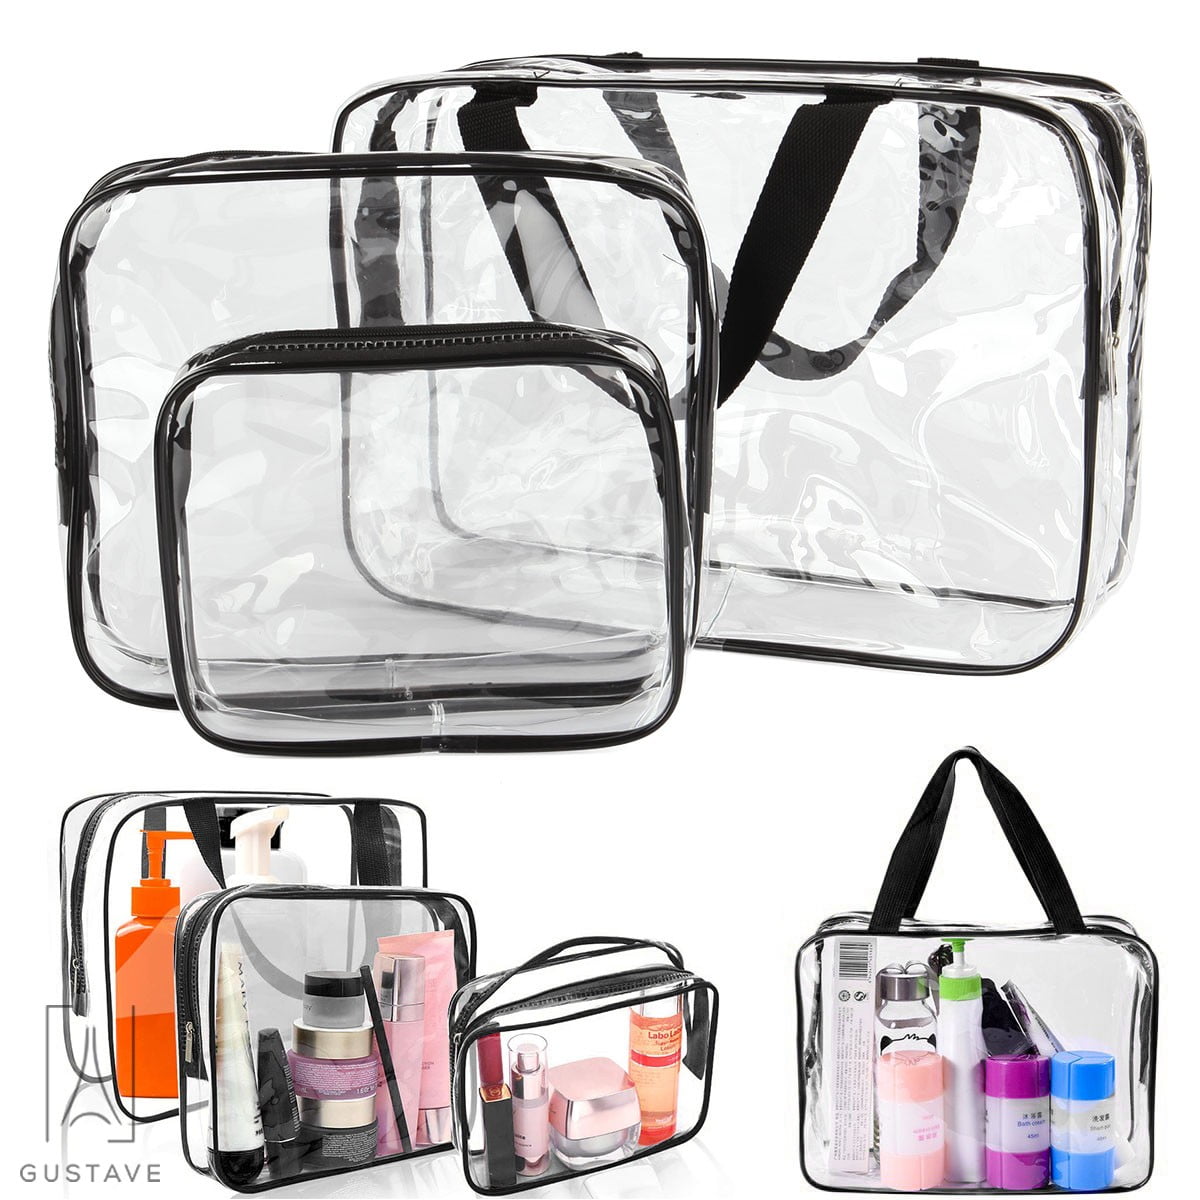 2X Travel Bags Shoes Storage Bag Pouch Portable Carrier Waterproof Organizers US 